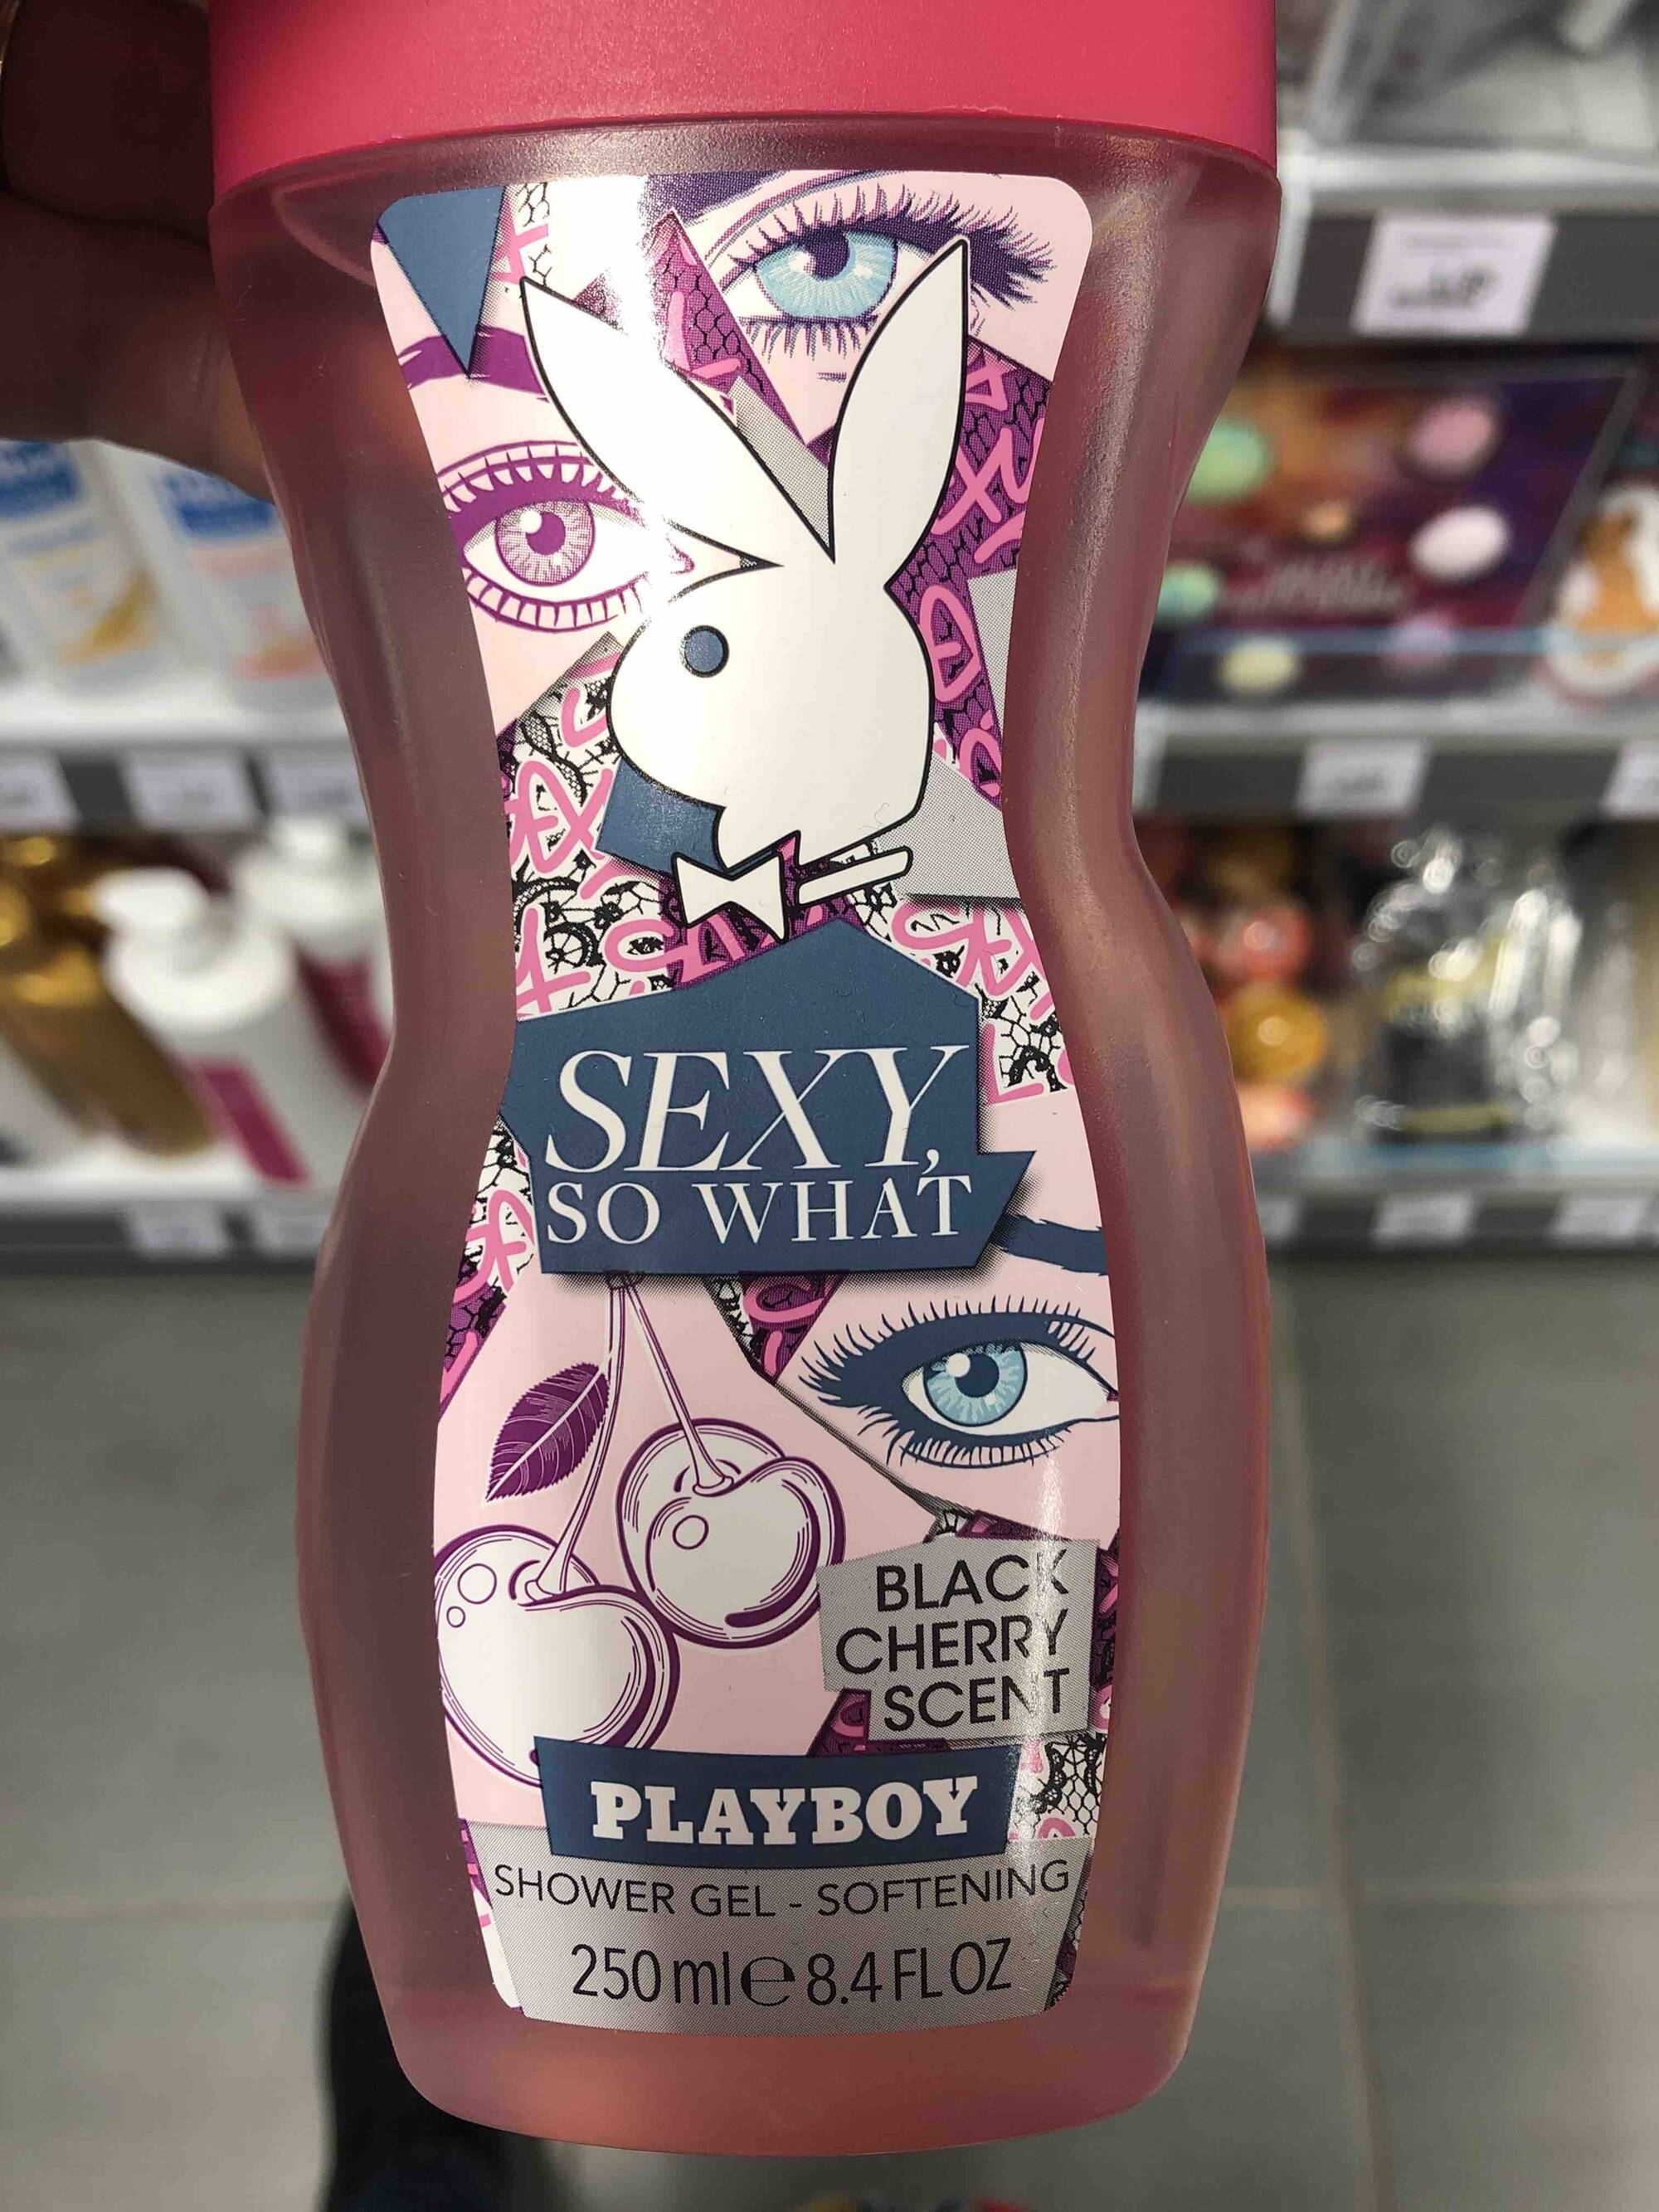 PLAYBOY - Sexy so what - Shower gel